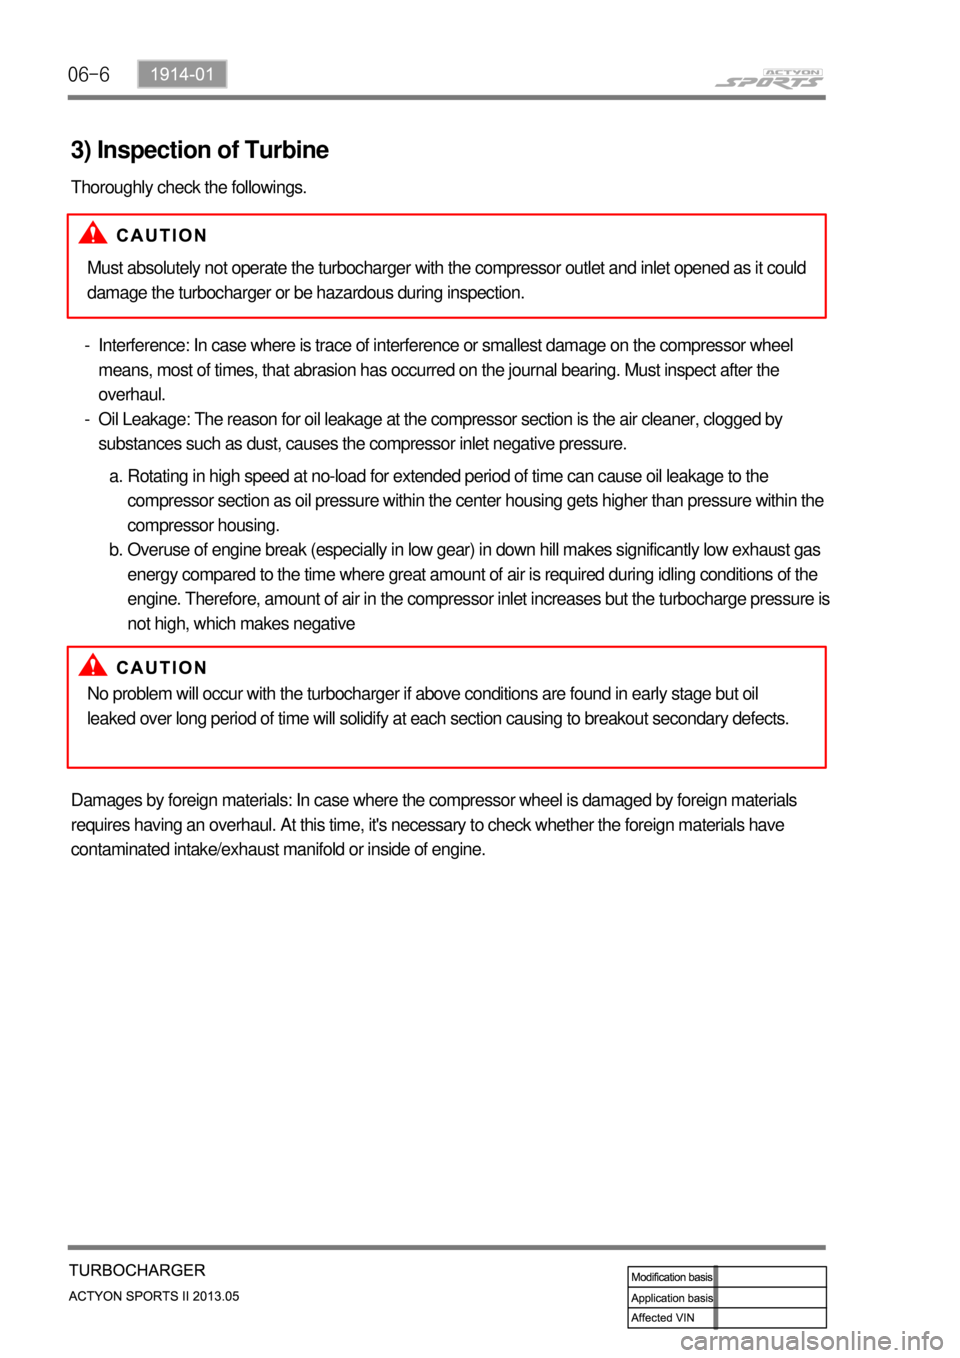 SSANGYONG NEW ACTYON SPORTS 2013  Service Manual 06-6
3) Inspection of Turbine
Thoroughly check the followings.
Must absolutely not operate the turbocharger with the compressor outlet and inlet opened as it could 
damage the turbocharger or be hazar